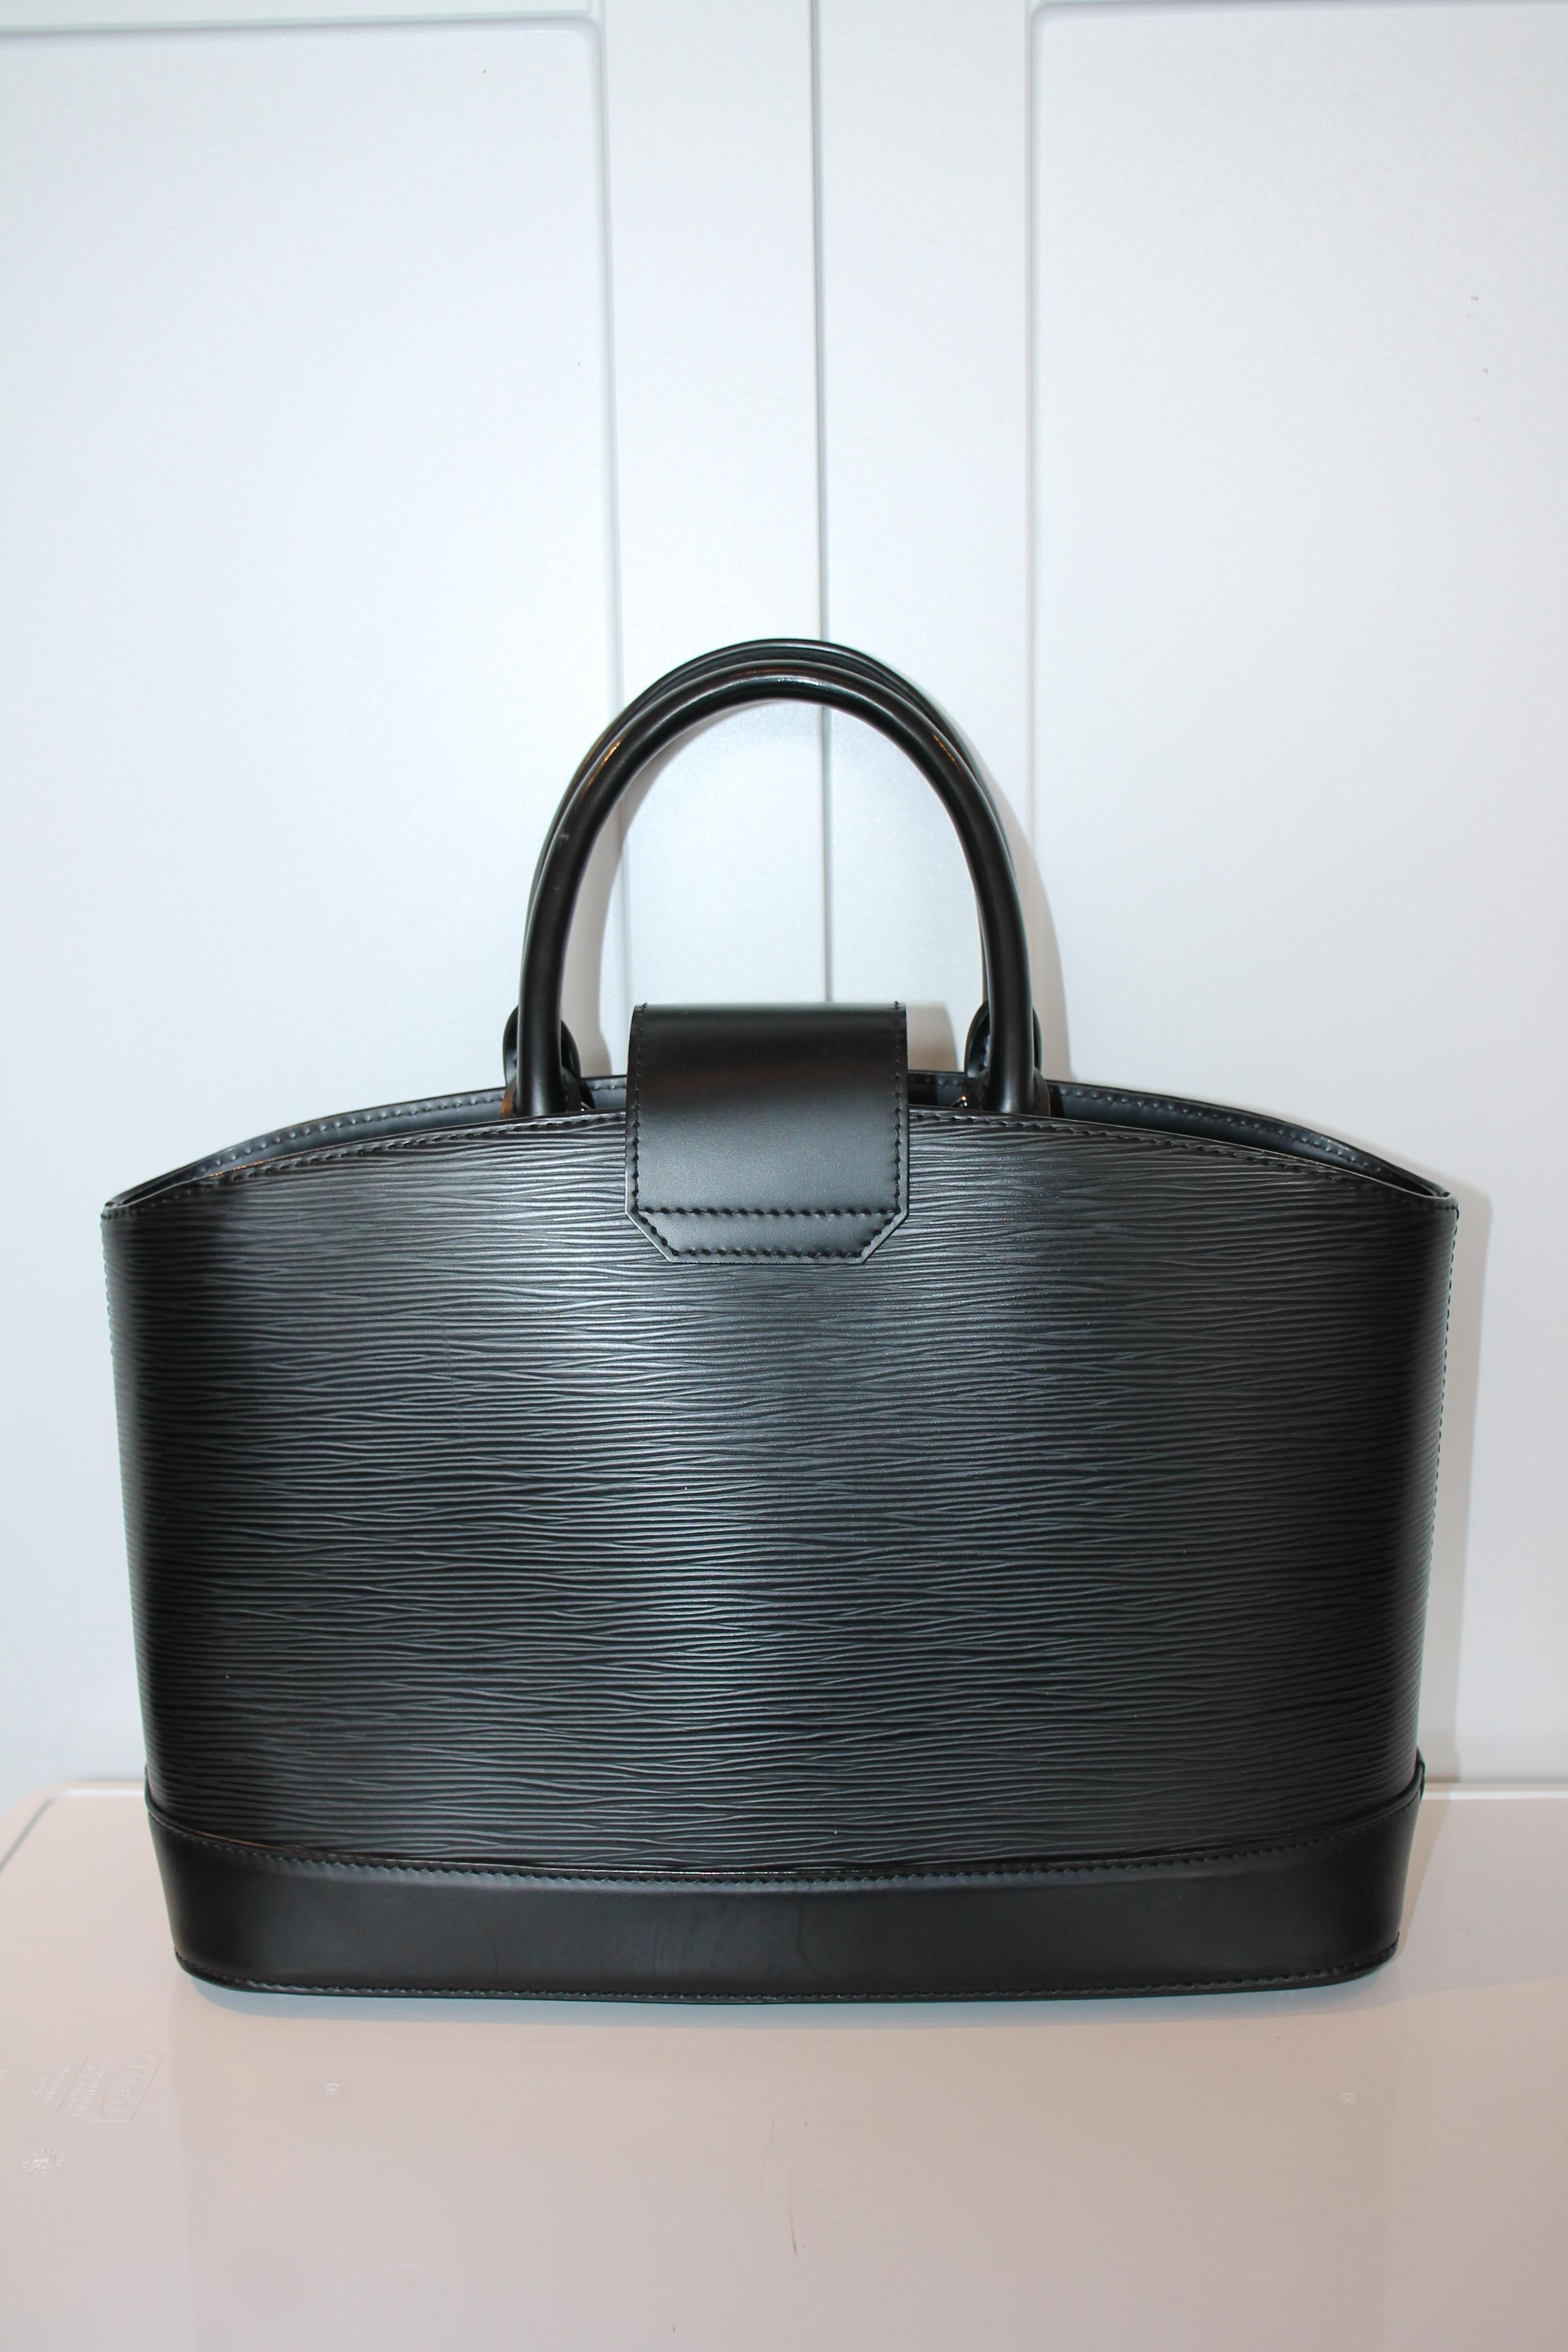 Louis Vuitton Epi Mirabeau GM In Excellent Condition For Sale In Roslyn, NY